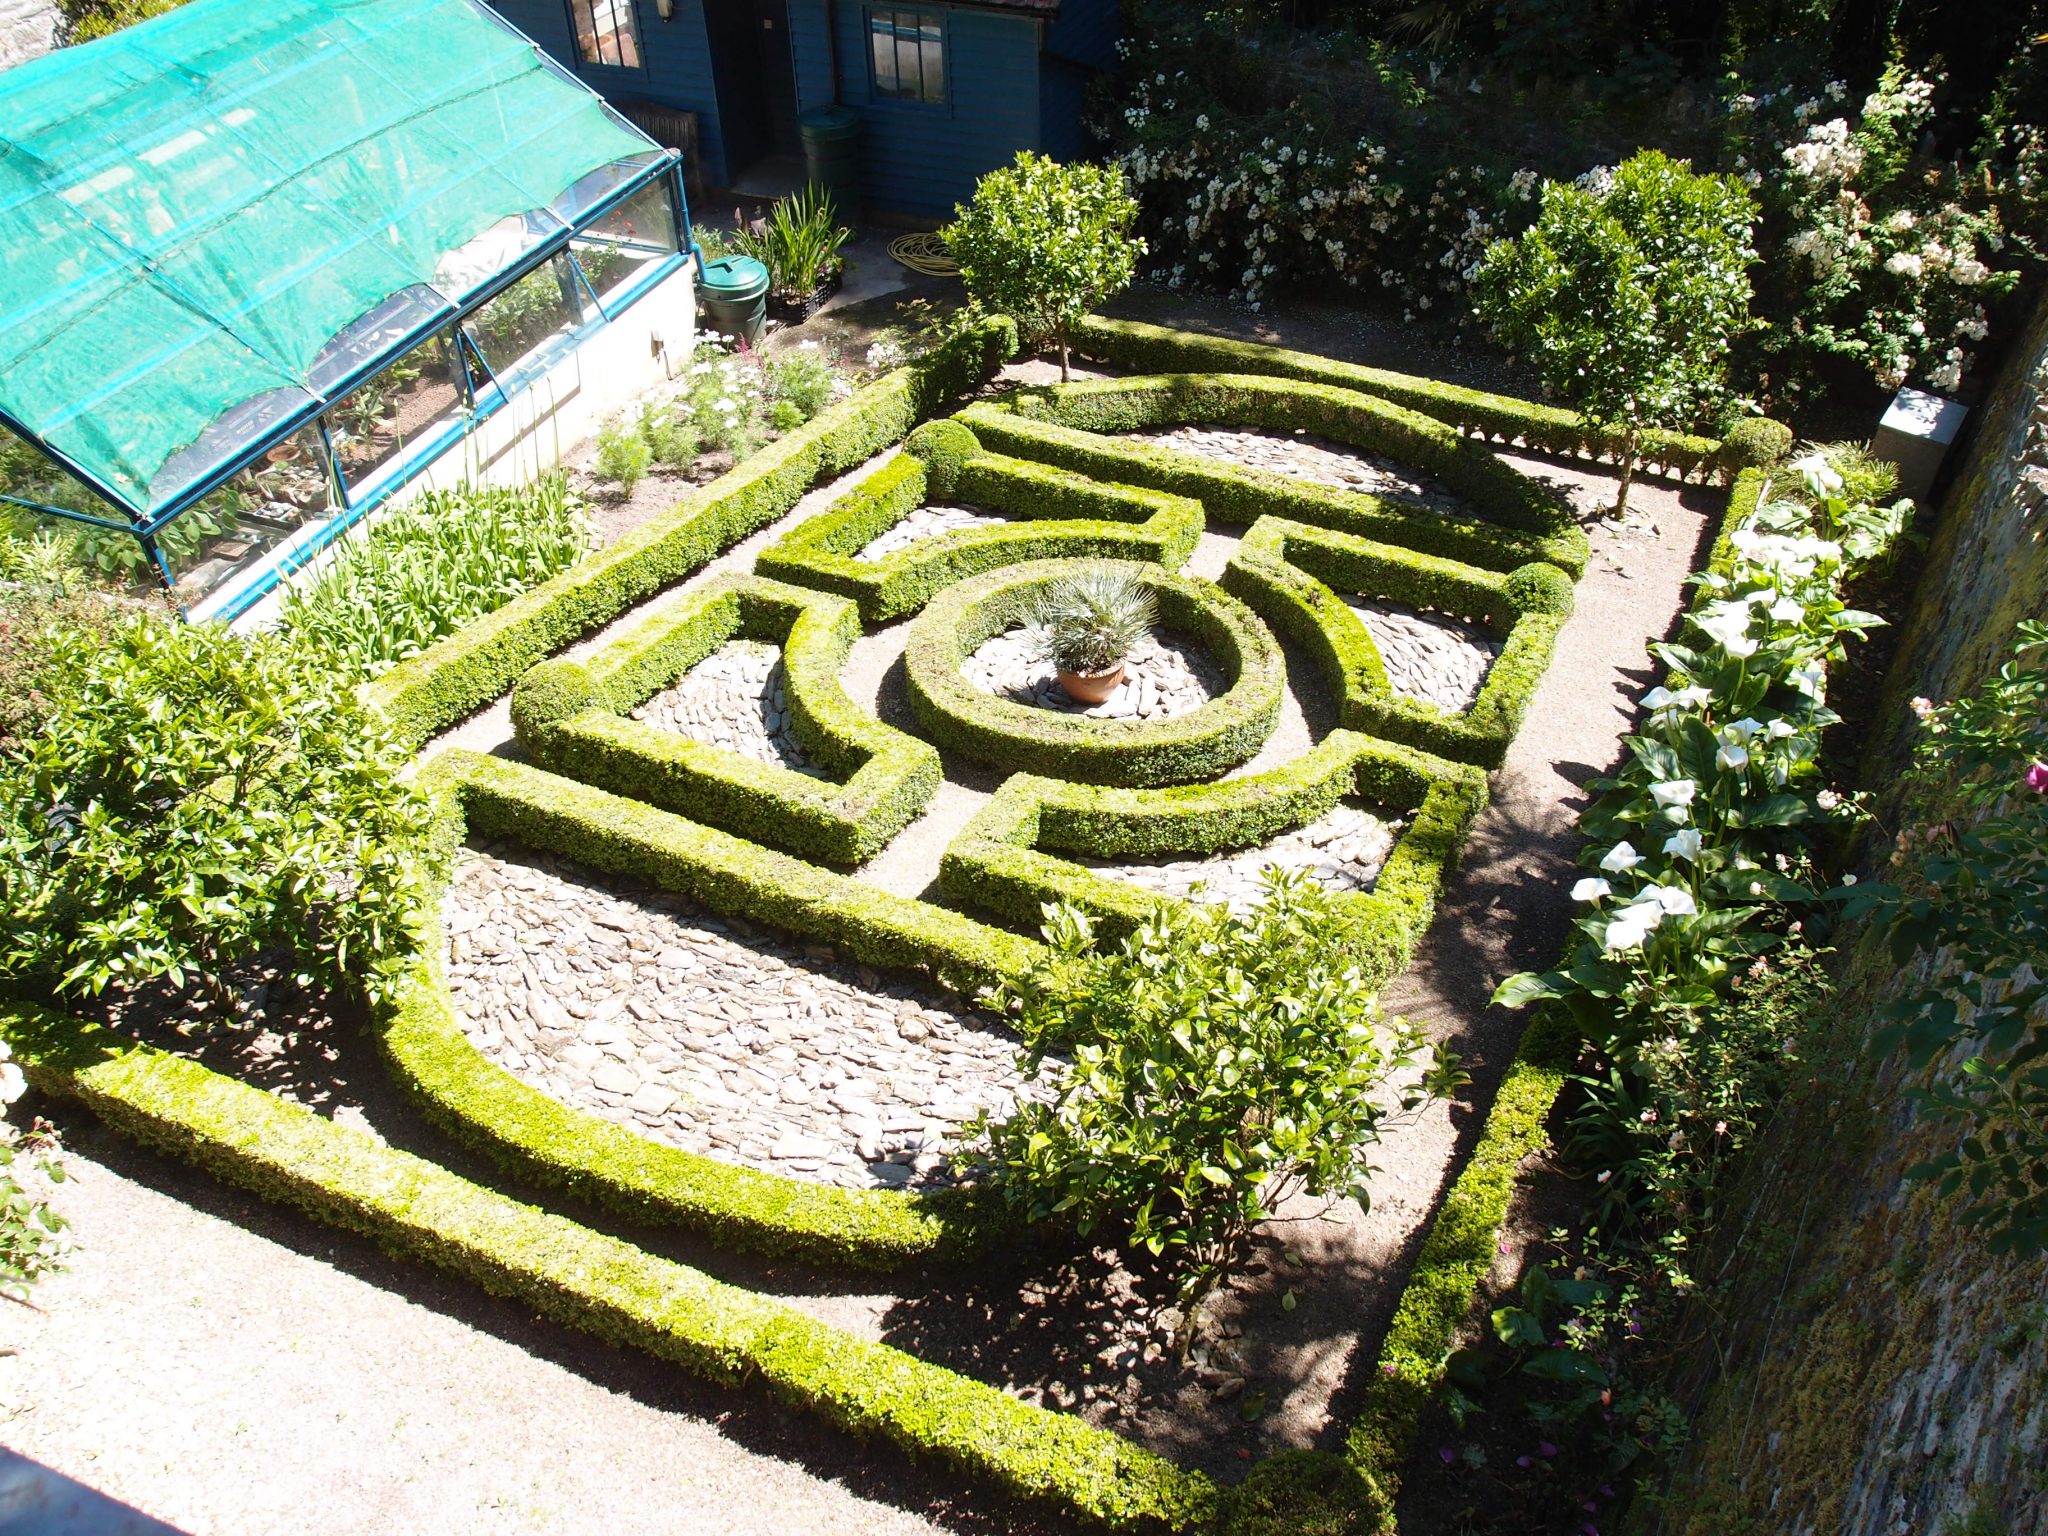 Another view of the Parterre. Orange and Lemon trees anchor the corners of this garden.